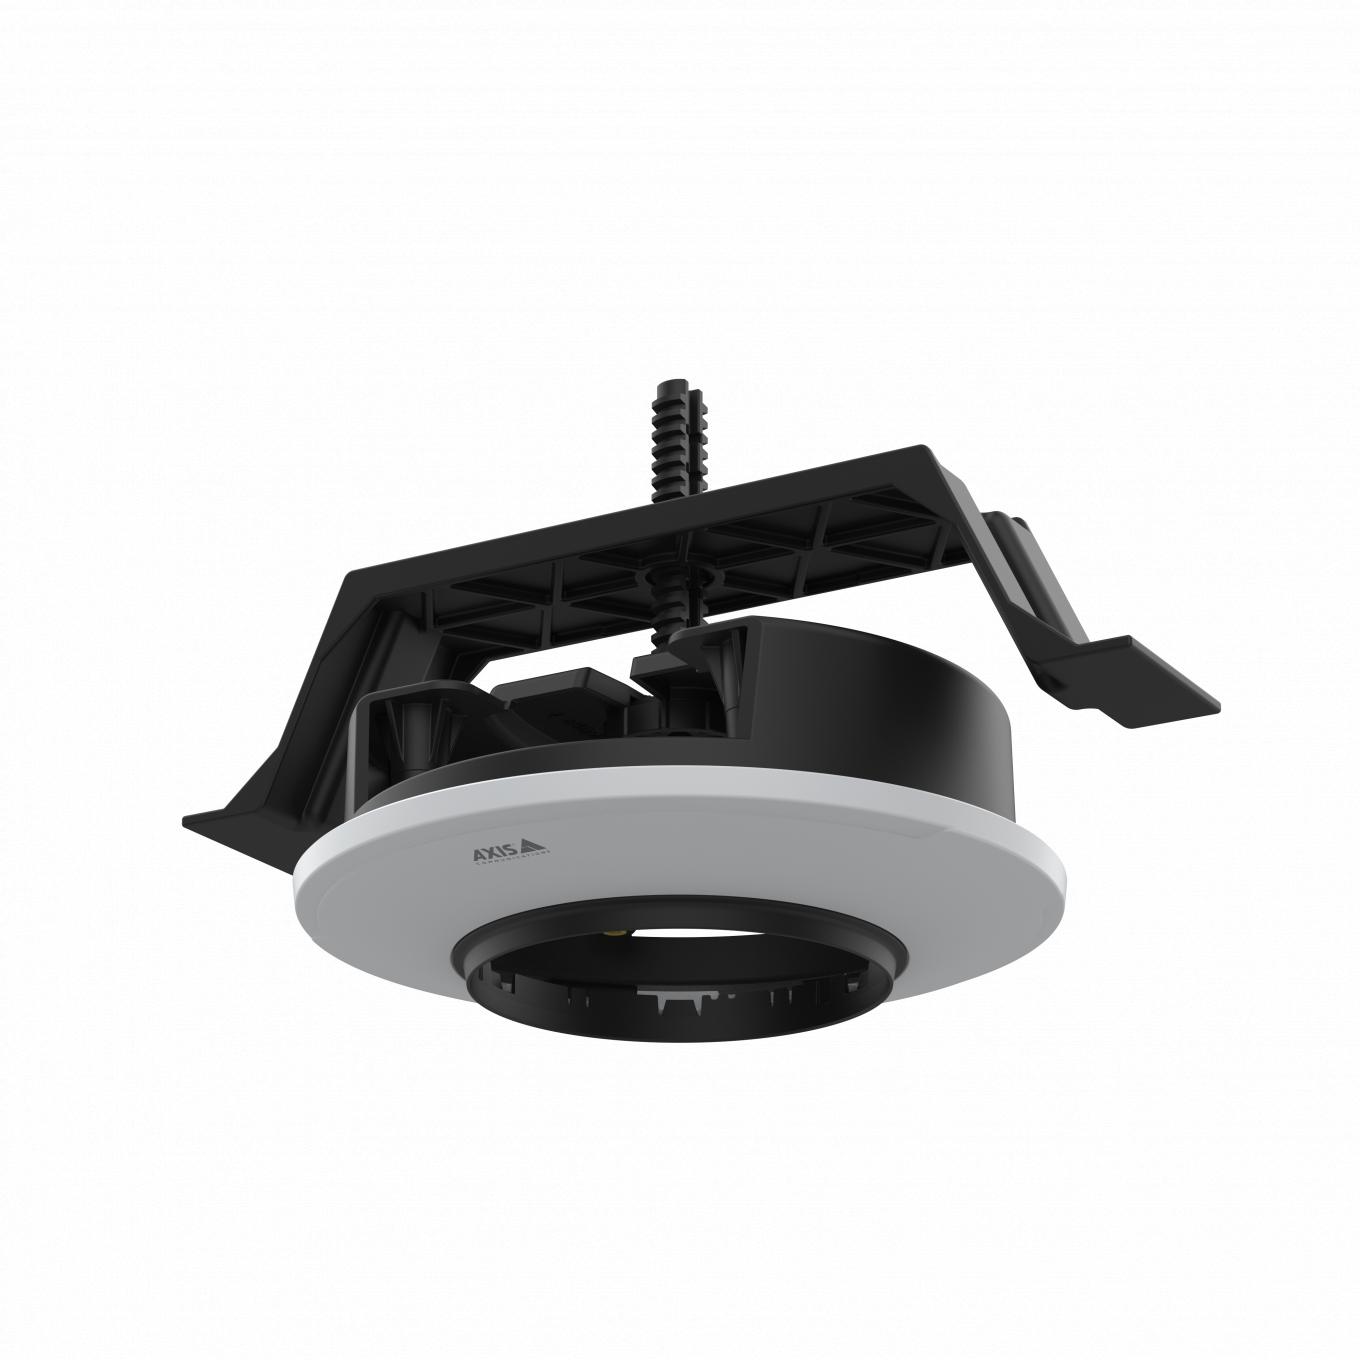 AXIS TP3203 Recessed Mount black and grey viewed from its left